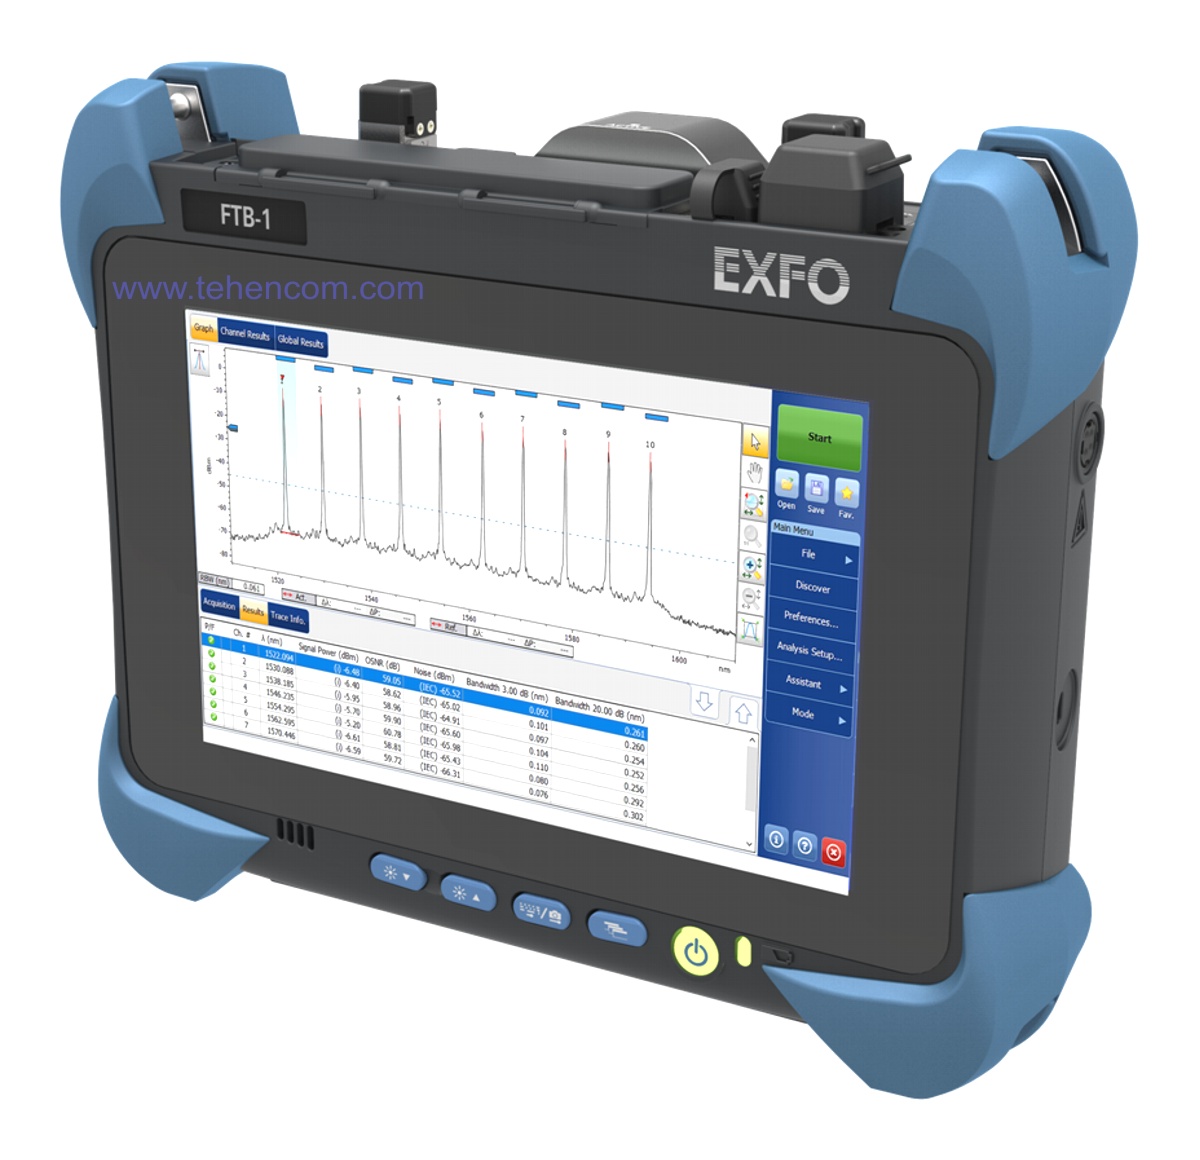 EXFO FTB-5235 Handheld Optical Spectrum Analyzer with DWDM support, channel spacing from 33 GHz to 200 GHz